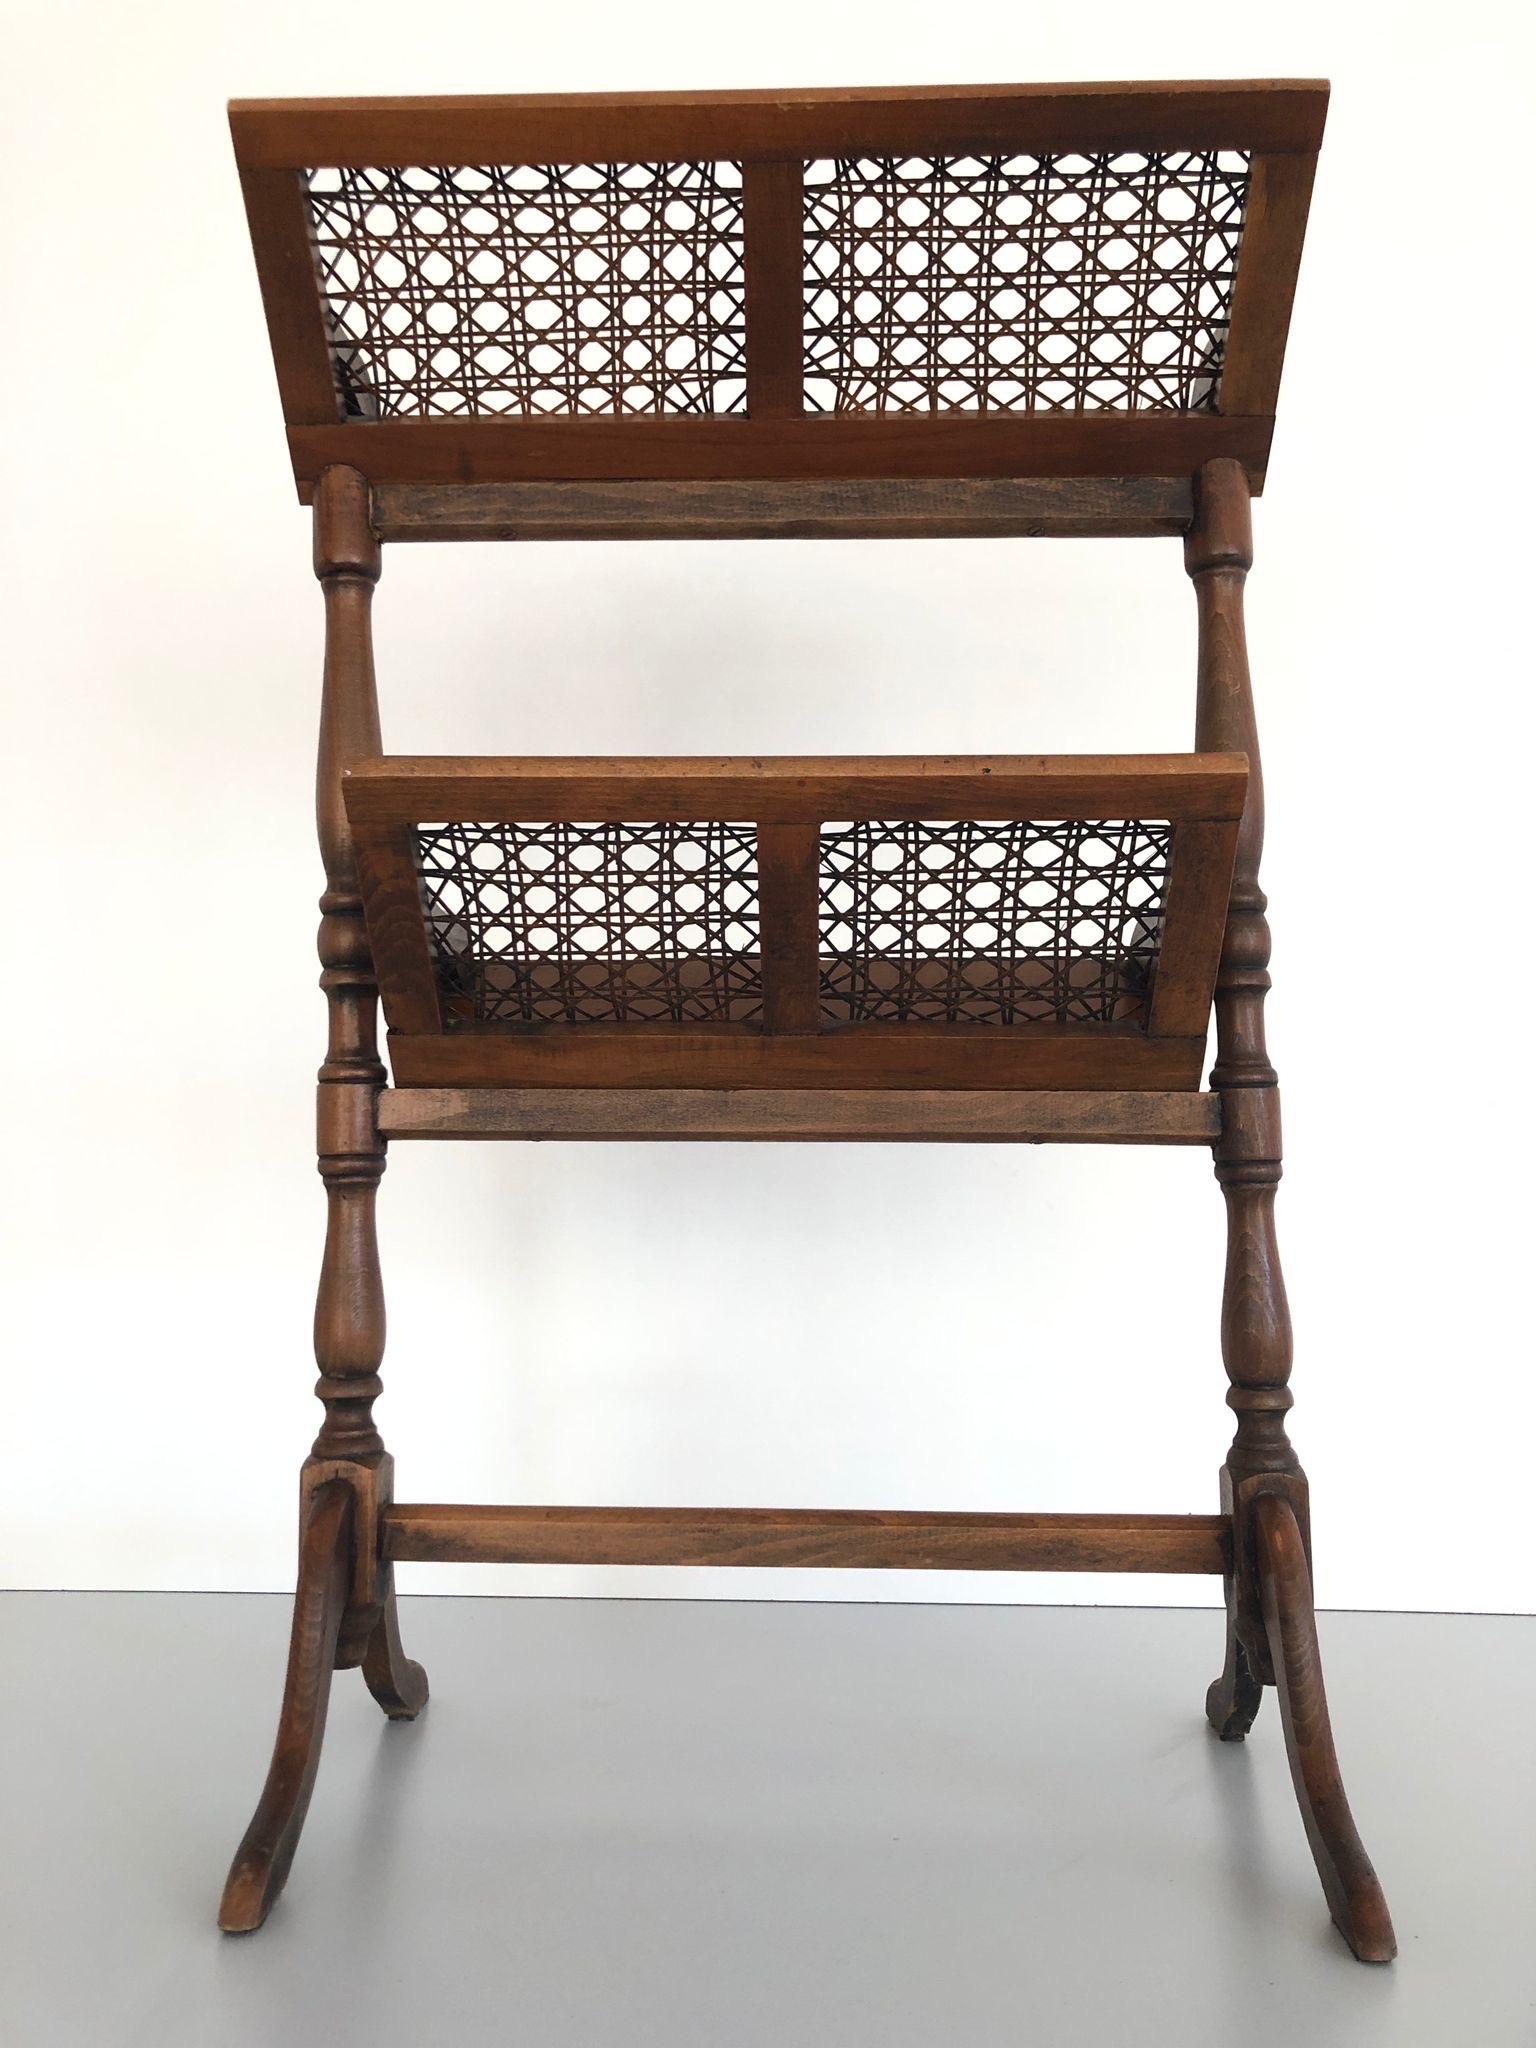 Mid-century Wood and Wicker 2-layer Magazine/Newspaper Stand, 1950s, Germany For Sale 3